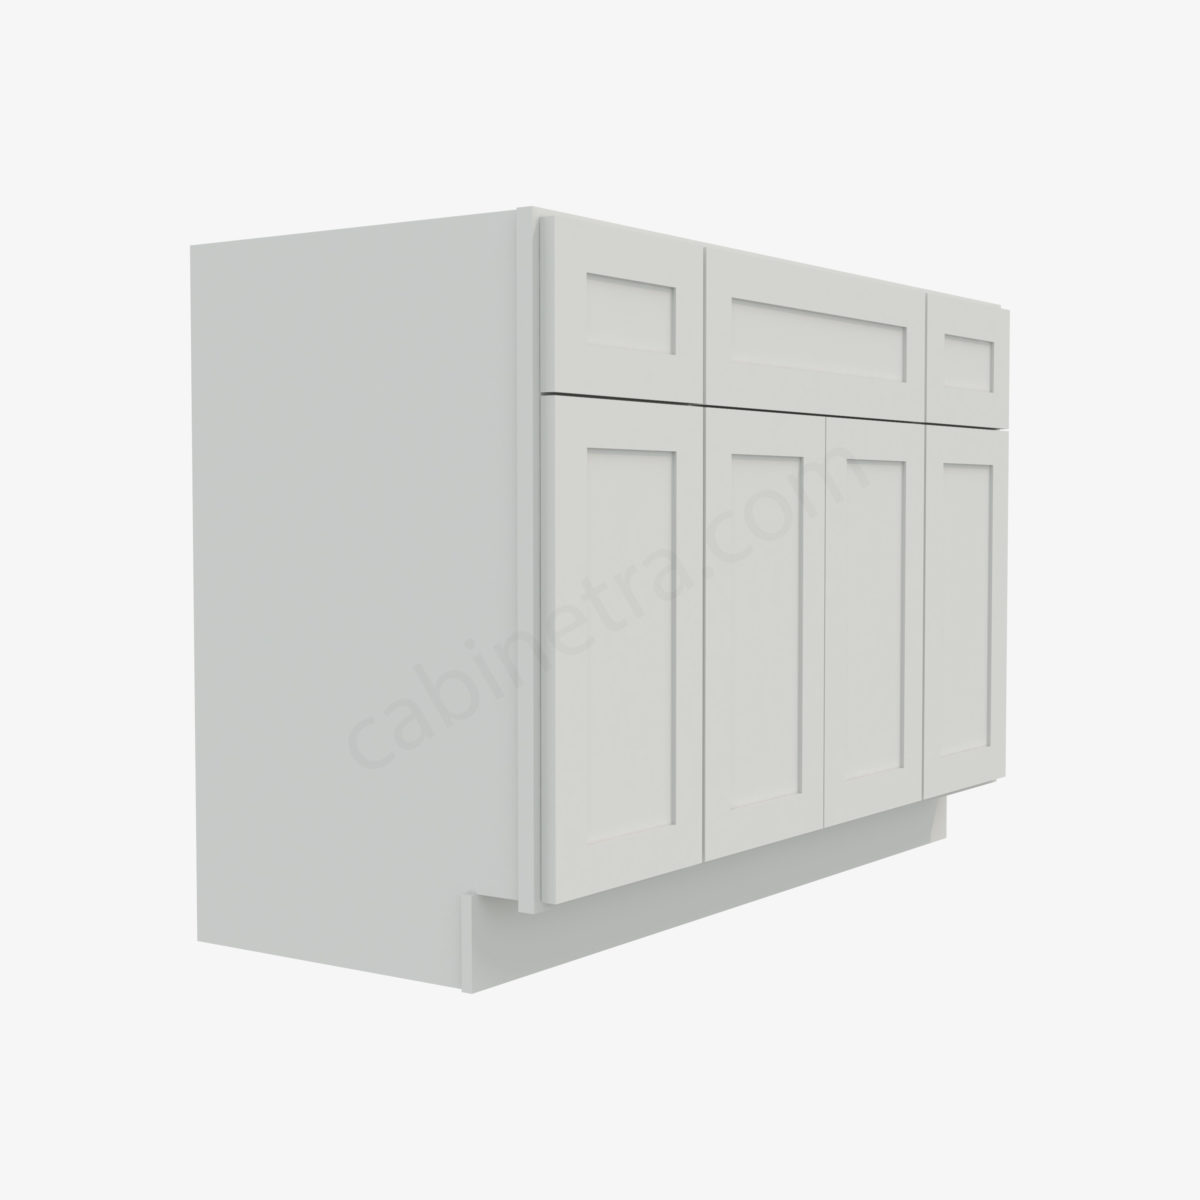 AW S4821B12D 34 4 Forevermark Ice White Shaker Cabinetra scaled